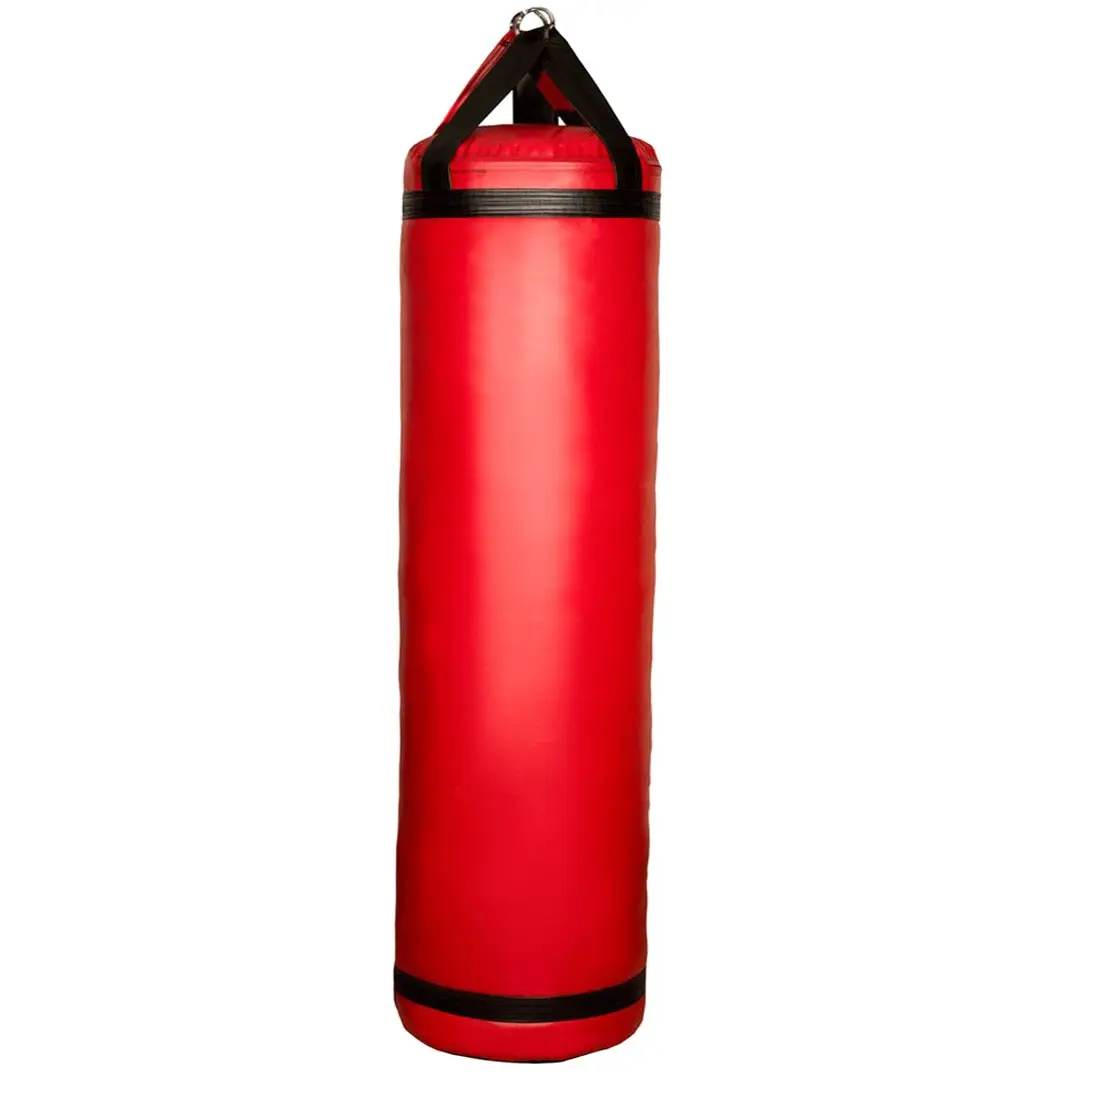 Heavy Boxing Use Home Fitness Hook Hanging Kick sacco da boxe boxe Training Fight Karate Punch Sand Bag